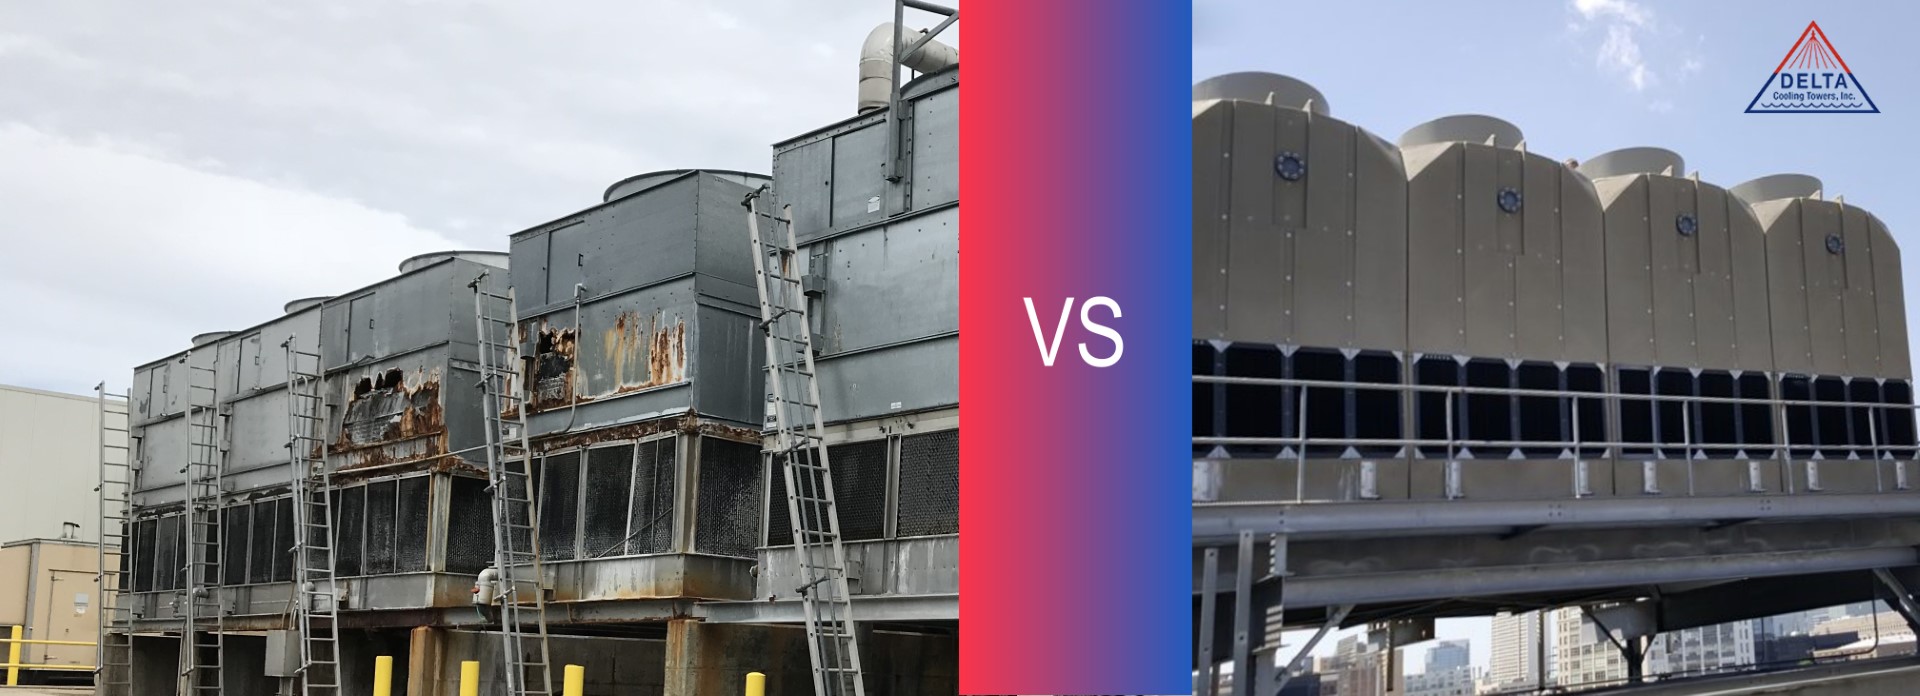 A comparison image of our competitors metal cooling towers rusting and causing damage to the cooling towers next to our plastic cooling tower without damage.  Between the two images is a red and blue gradient line to separate them.